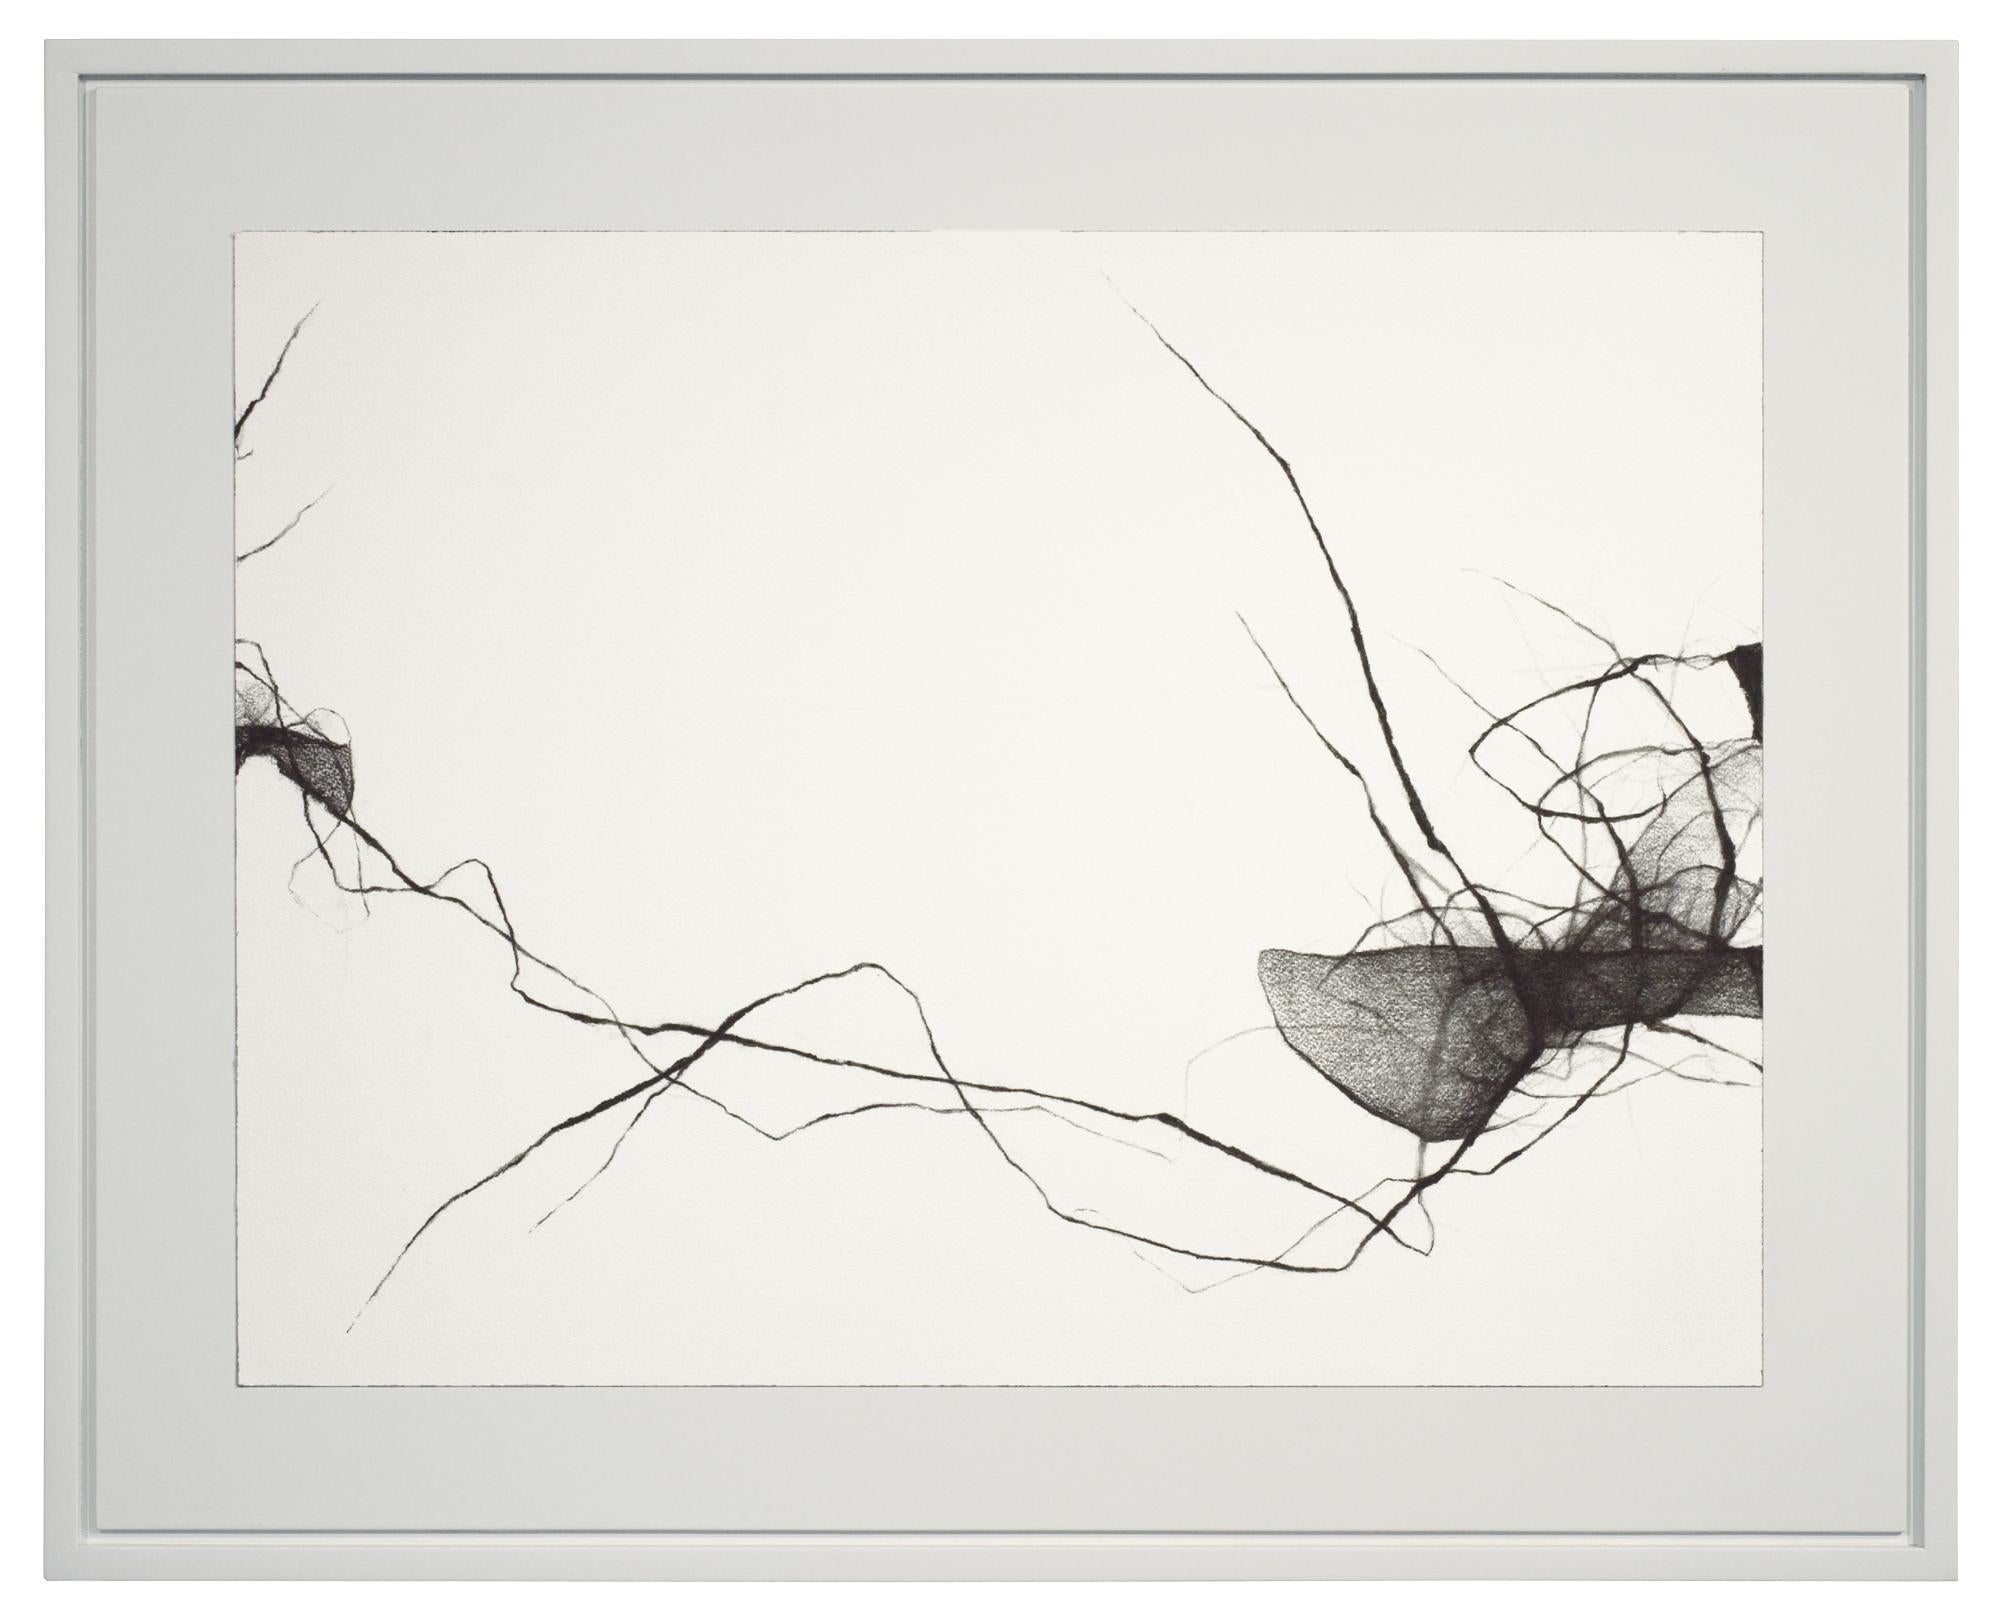 David Mellen Abstract Drawing - Minimal, Charcoal Drawing: 'Voices II'